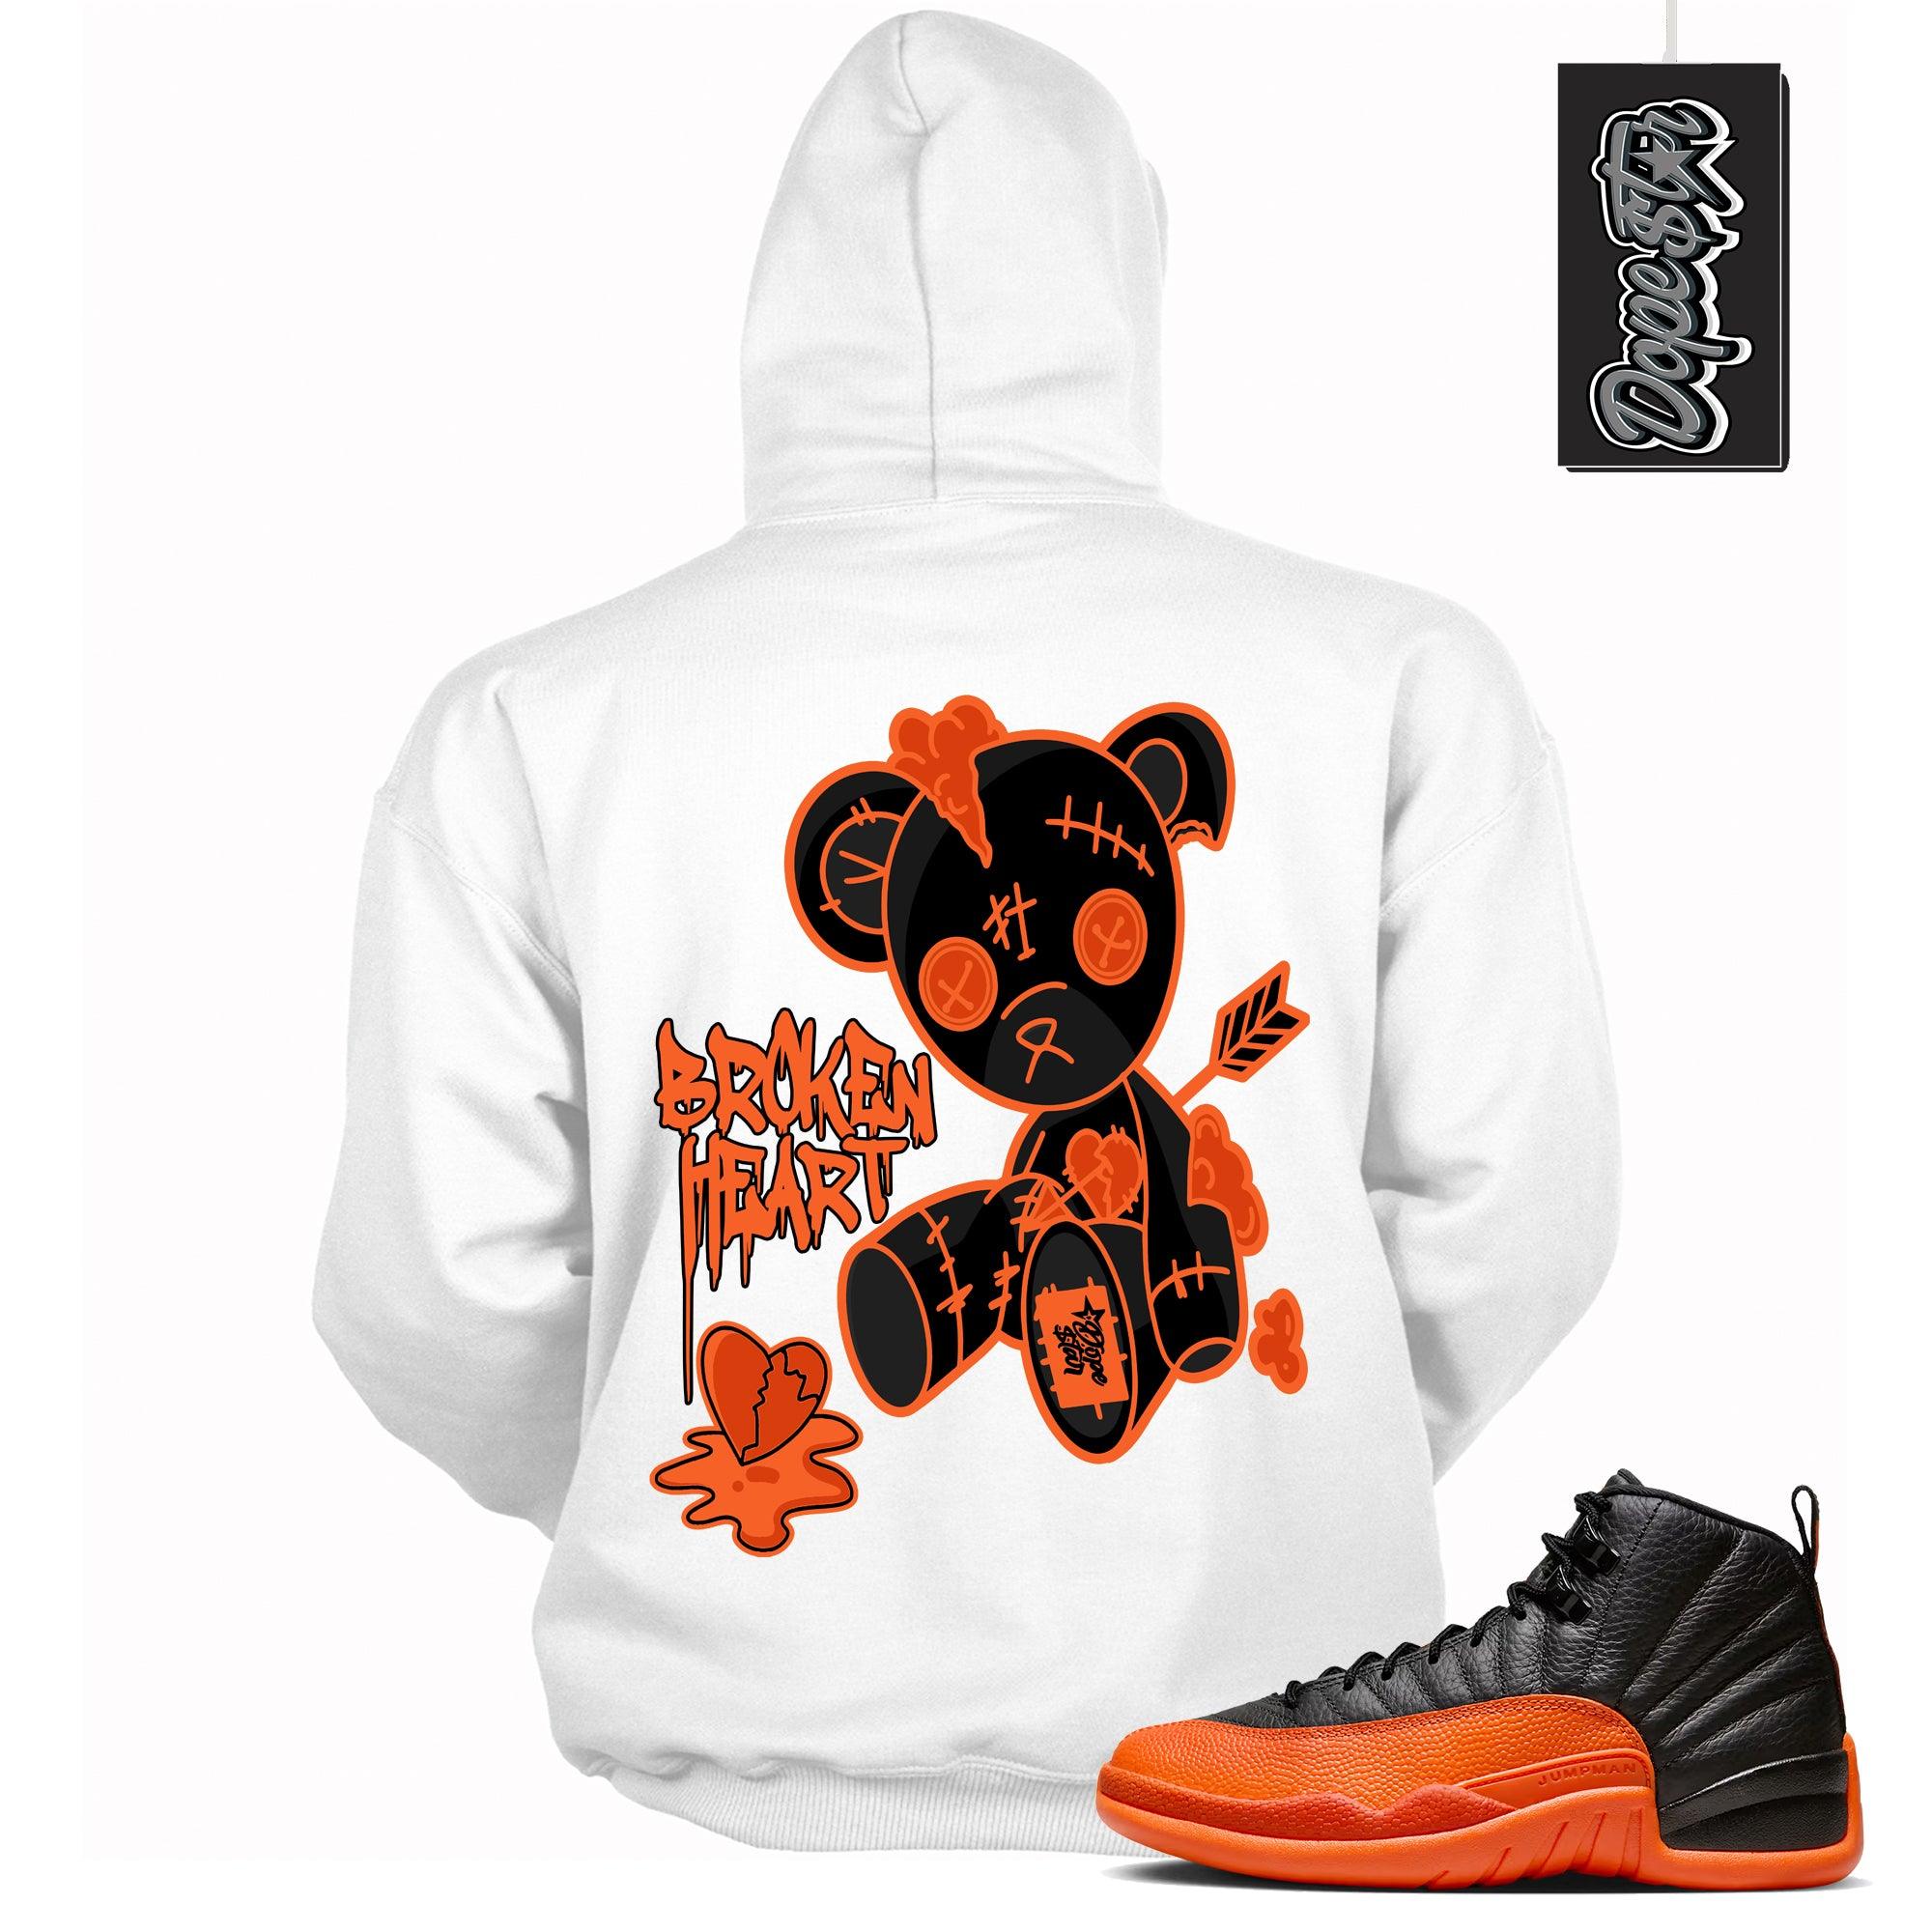 Cool White Graphic Hoodie with “ Broken Heart Bear “ print, that perfectly matches Air Jordan 12 Retro WNBA All-Star Brilliant Orange  sneakers